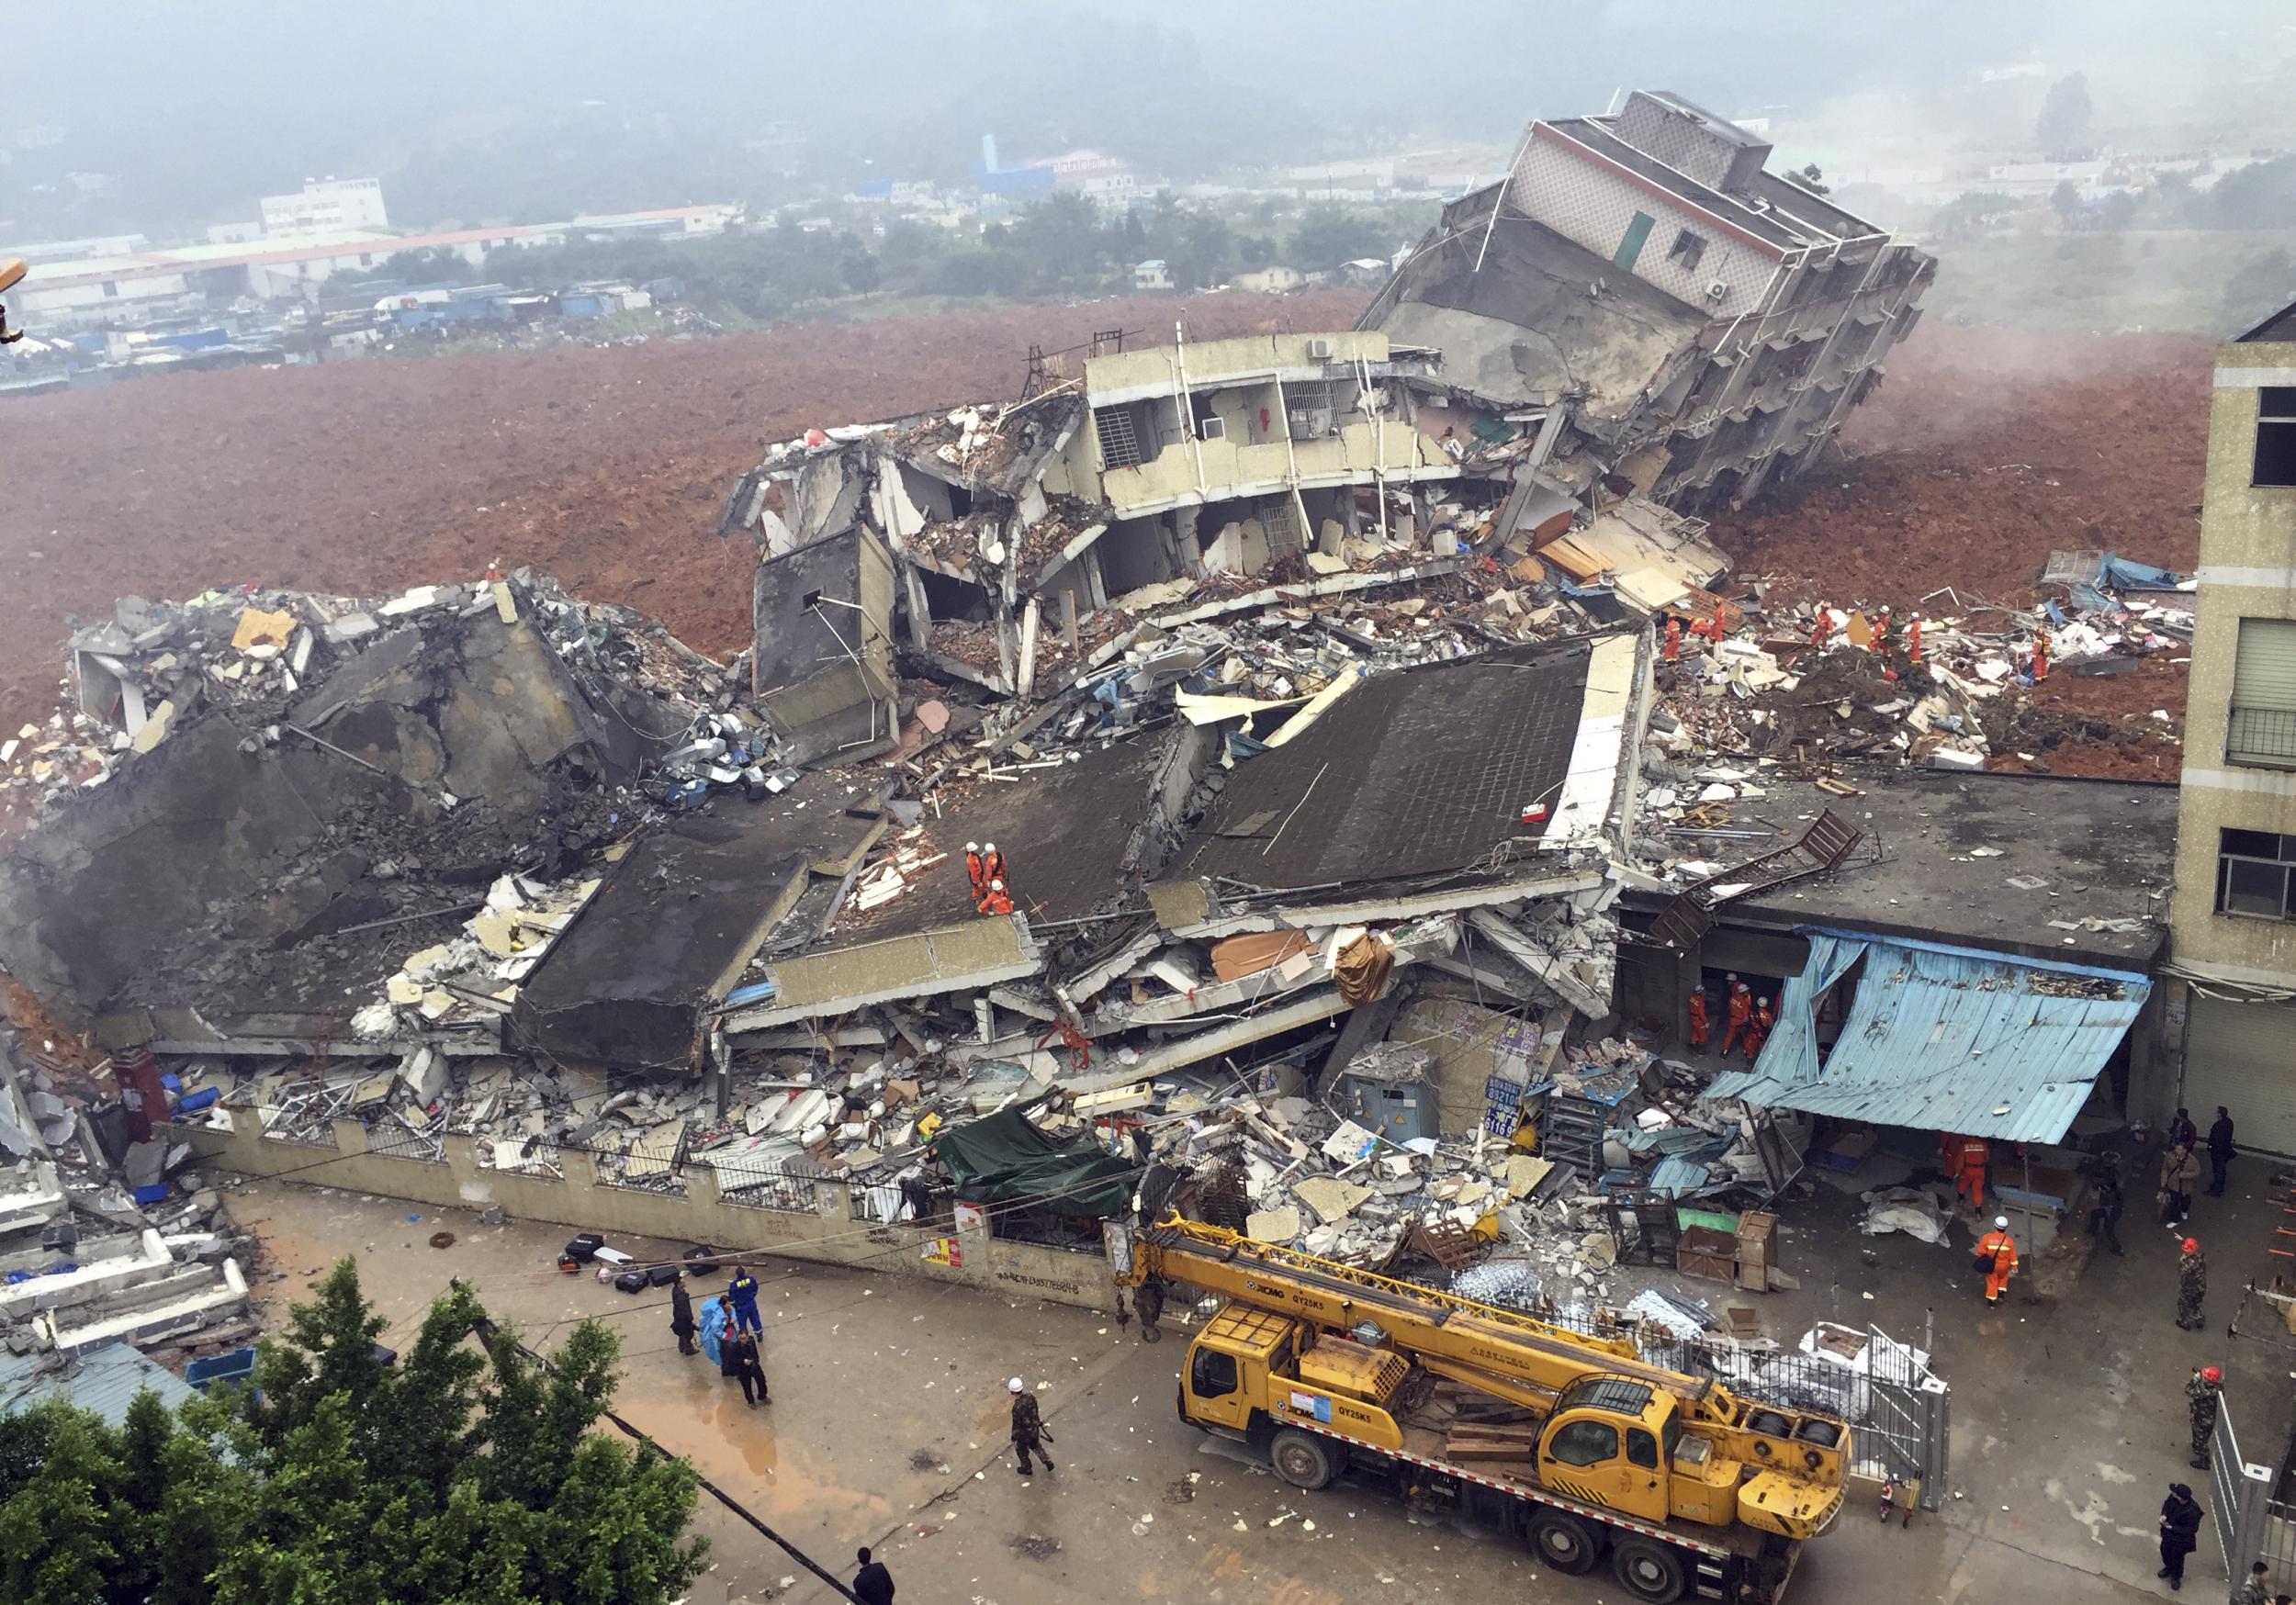 Some 22 buildings collapsed after a landslide in Shenzhen's industrial park on Sunday morning